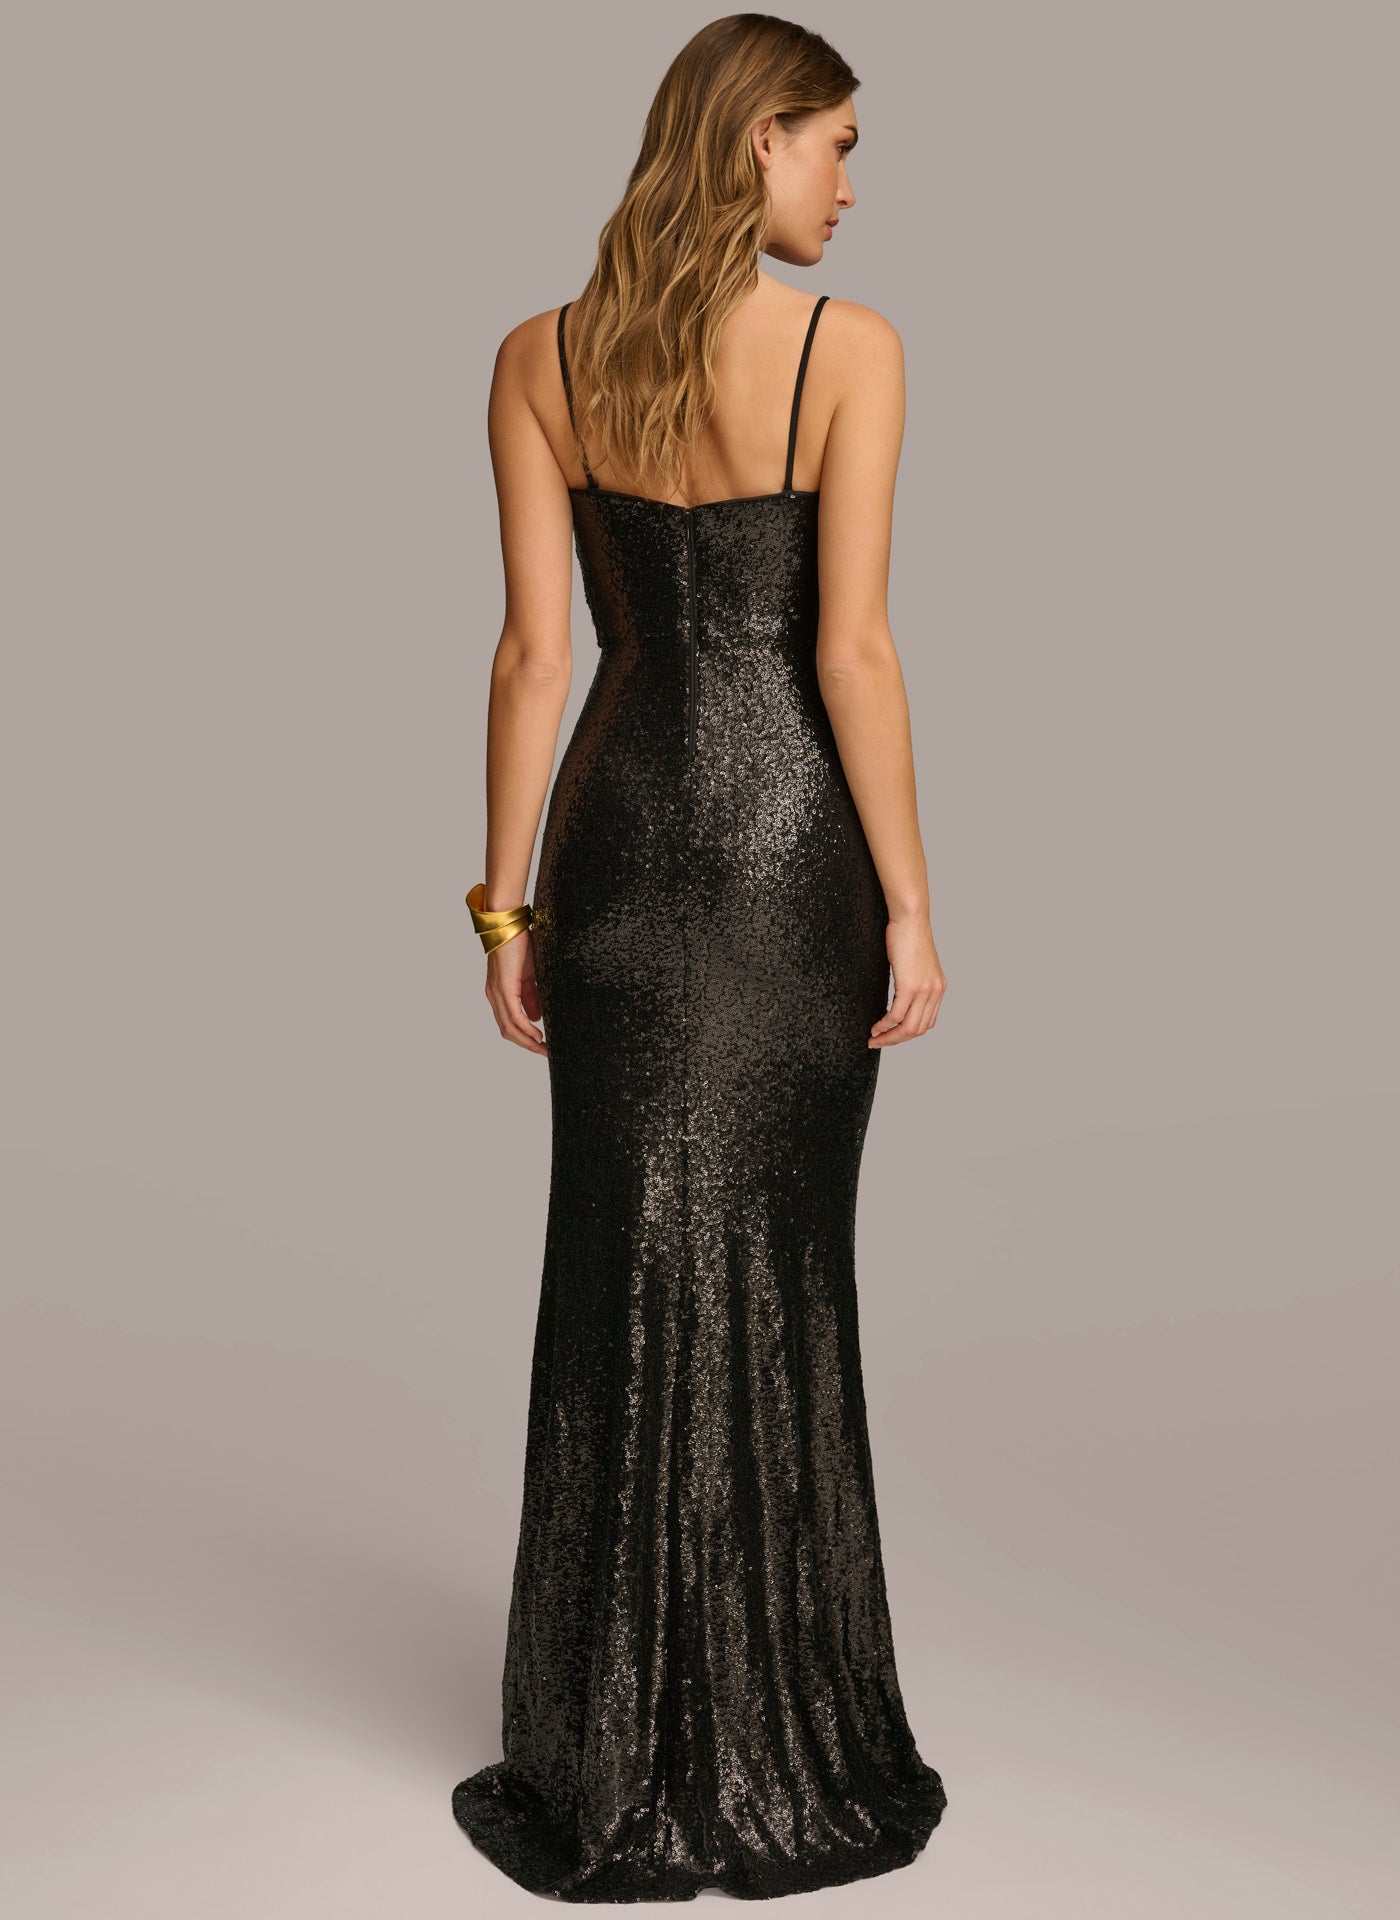 SEQUIN SLEEVELESS GOWN